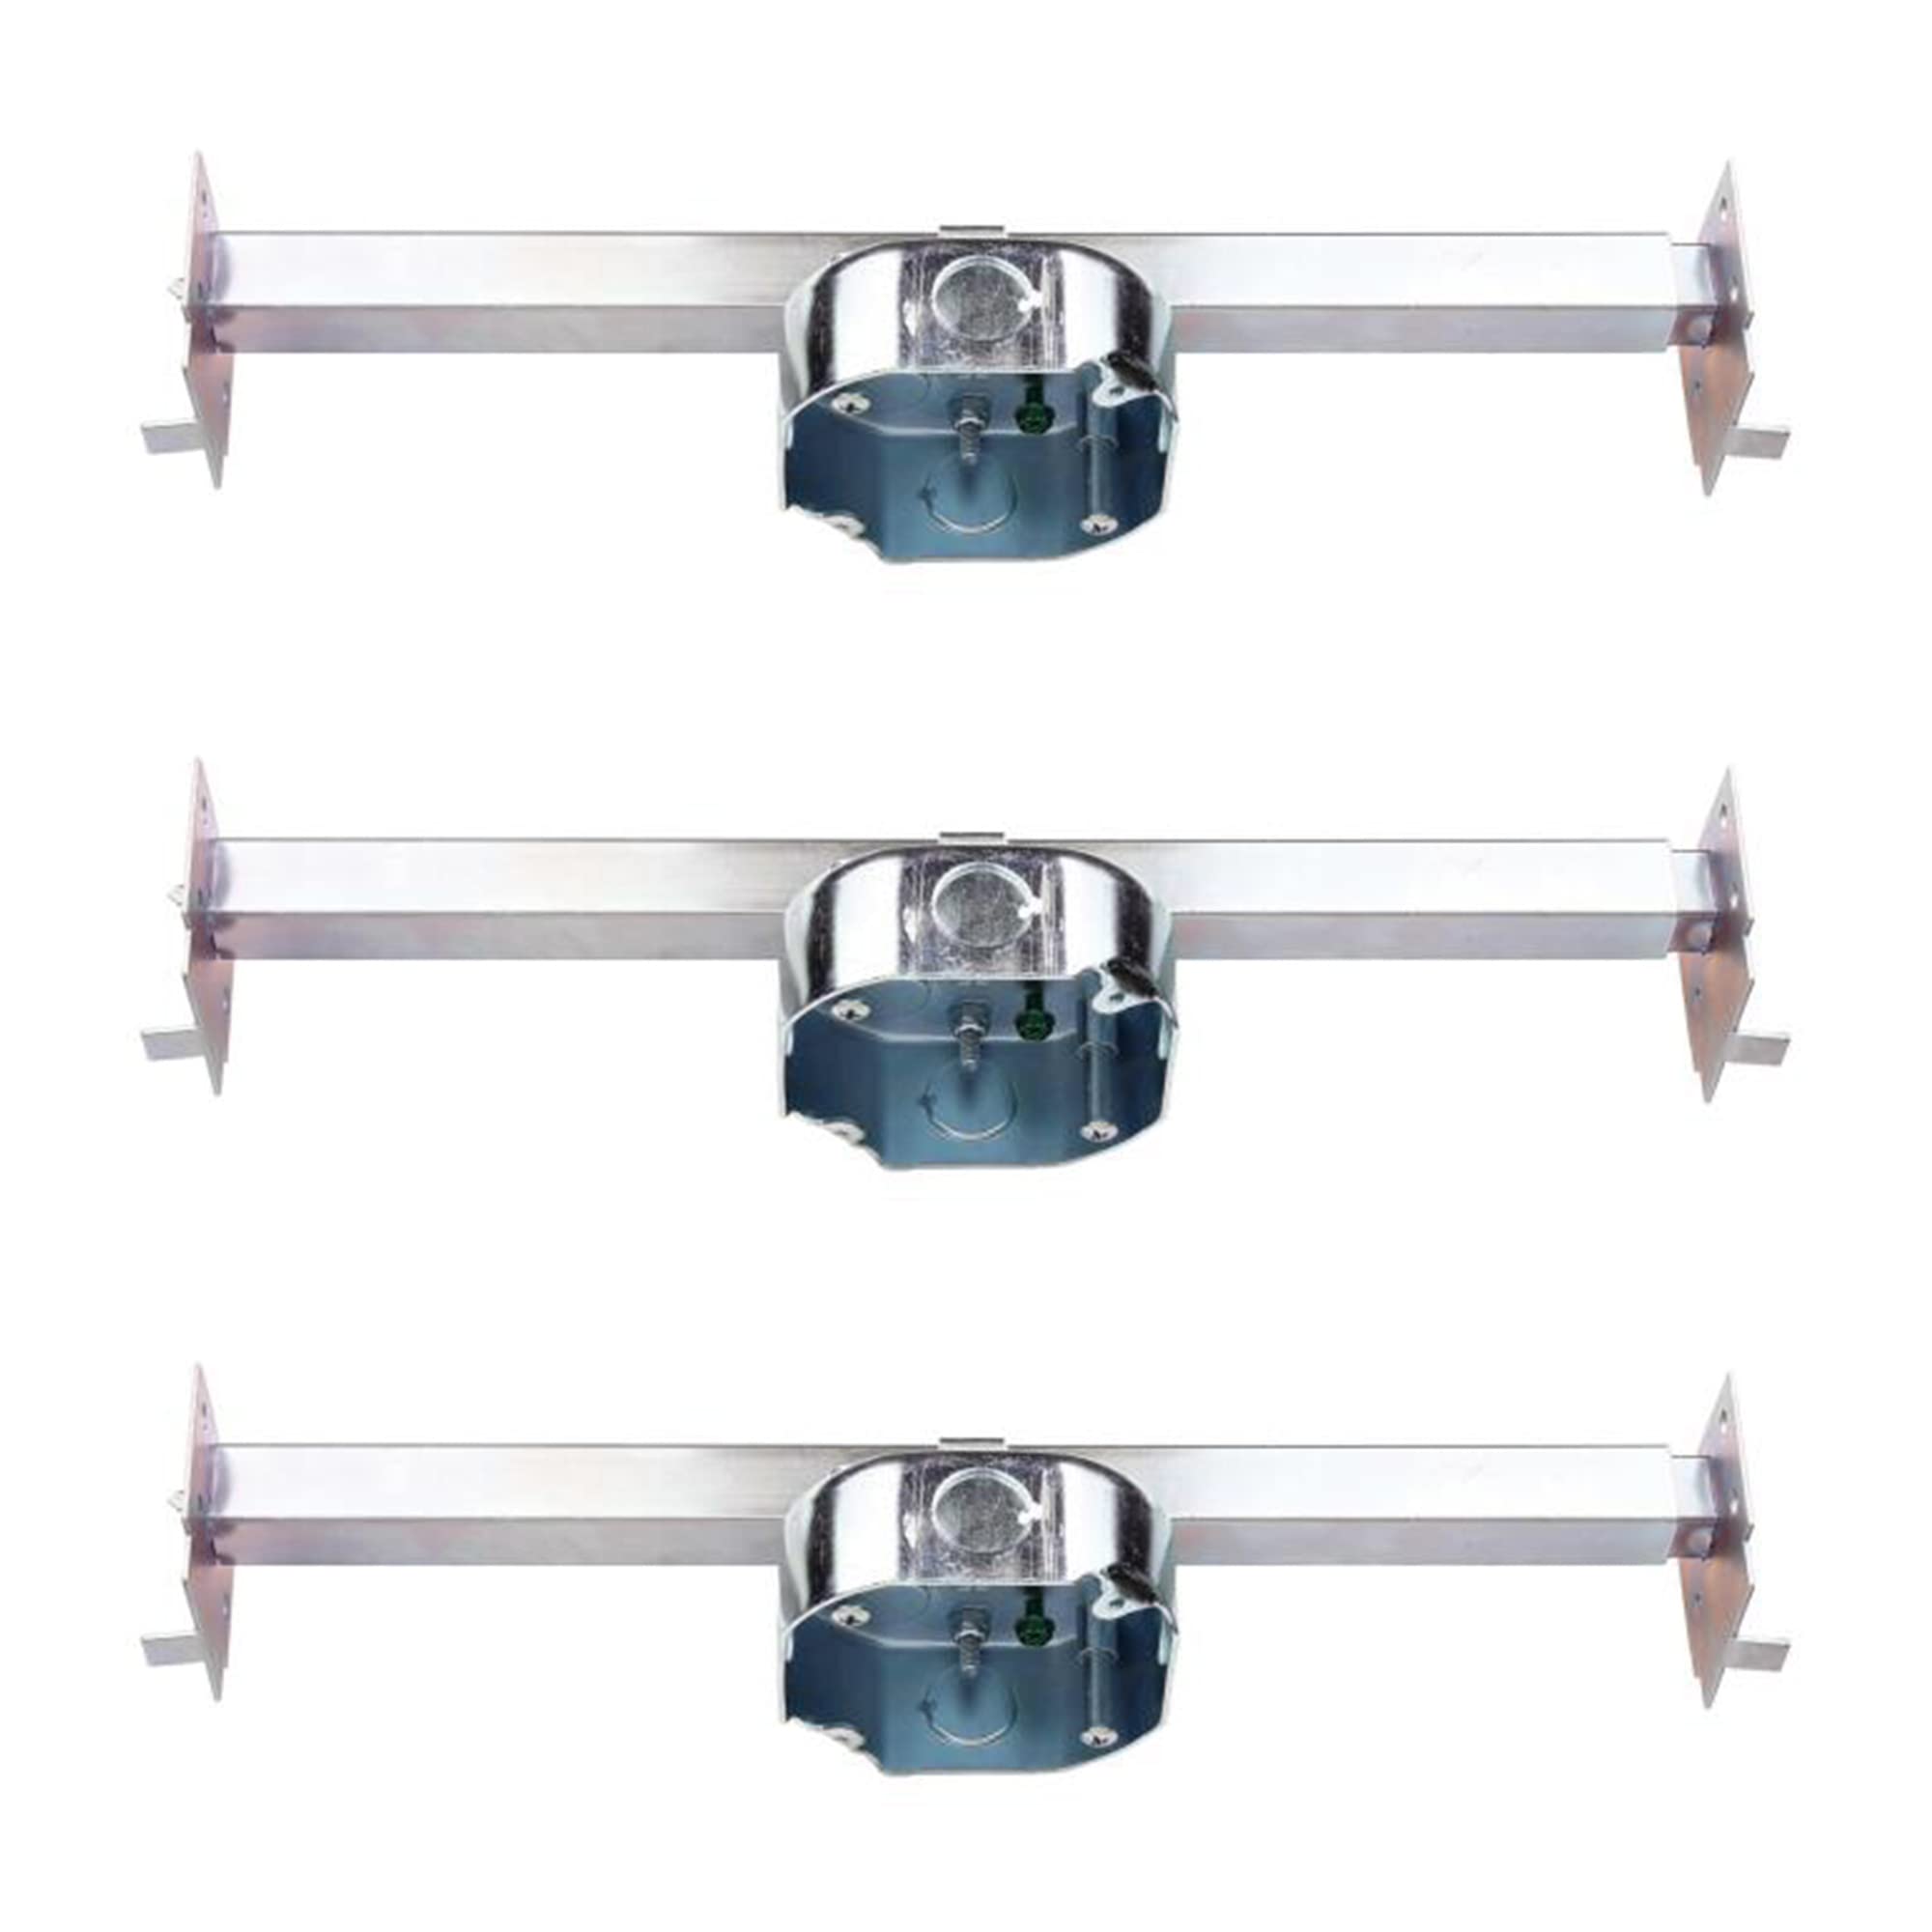 Ciata Heavy Duty Metal Mounting Saf-T-Brace /Saf-T-Bar with Deep Box for Mounting Ceiling Fans, Light Fixtures, or Chandeliers – 3 Pack  - Like New